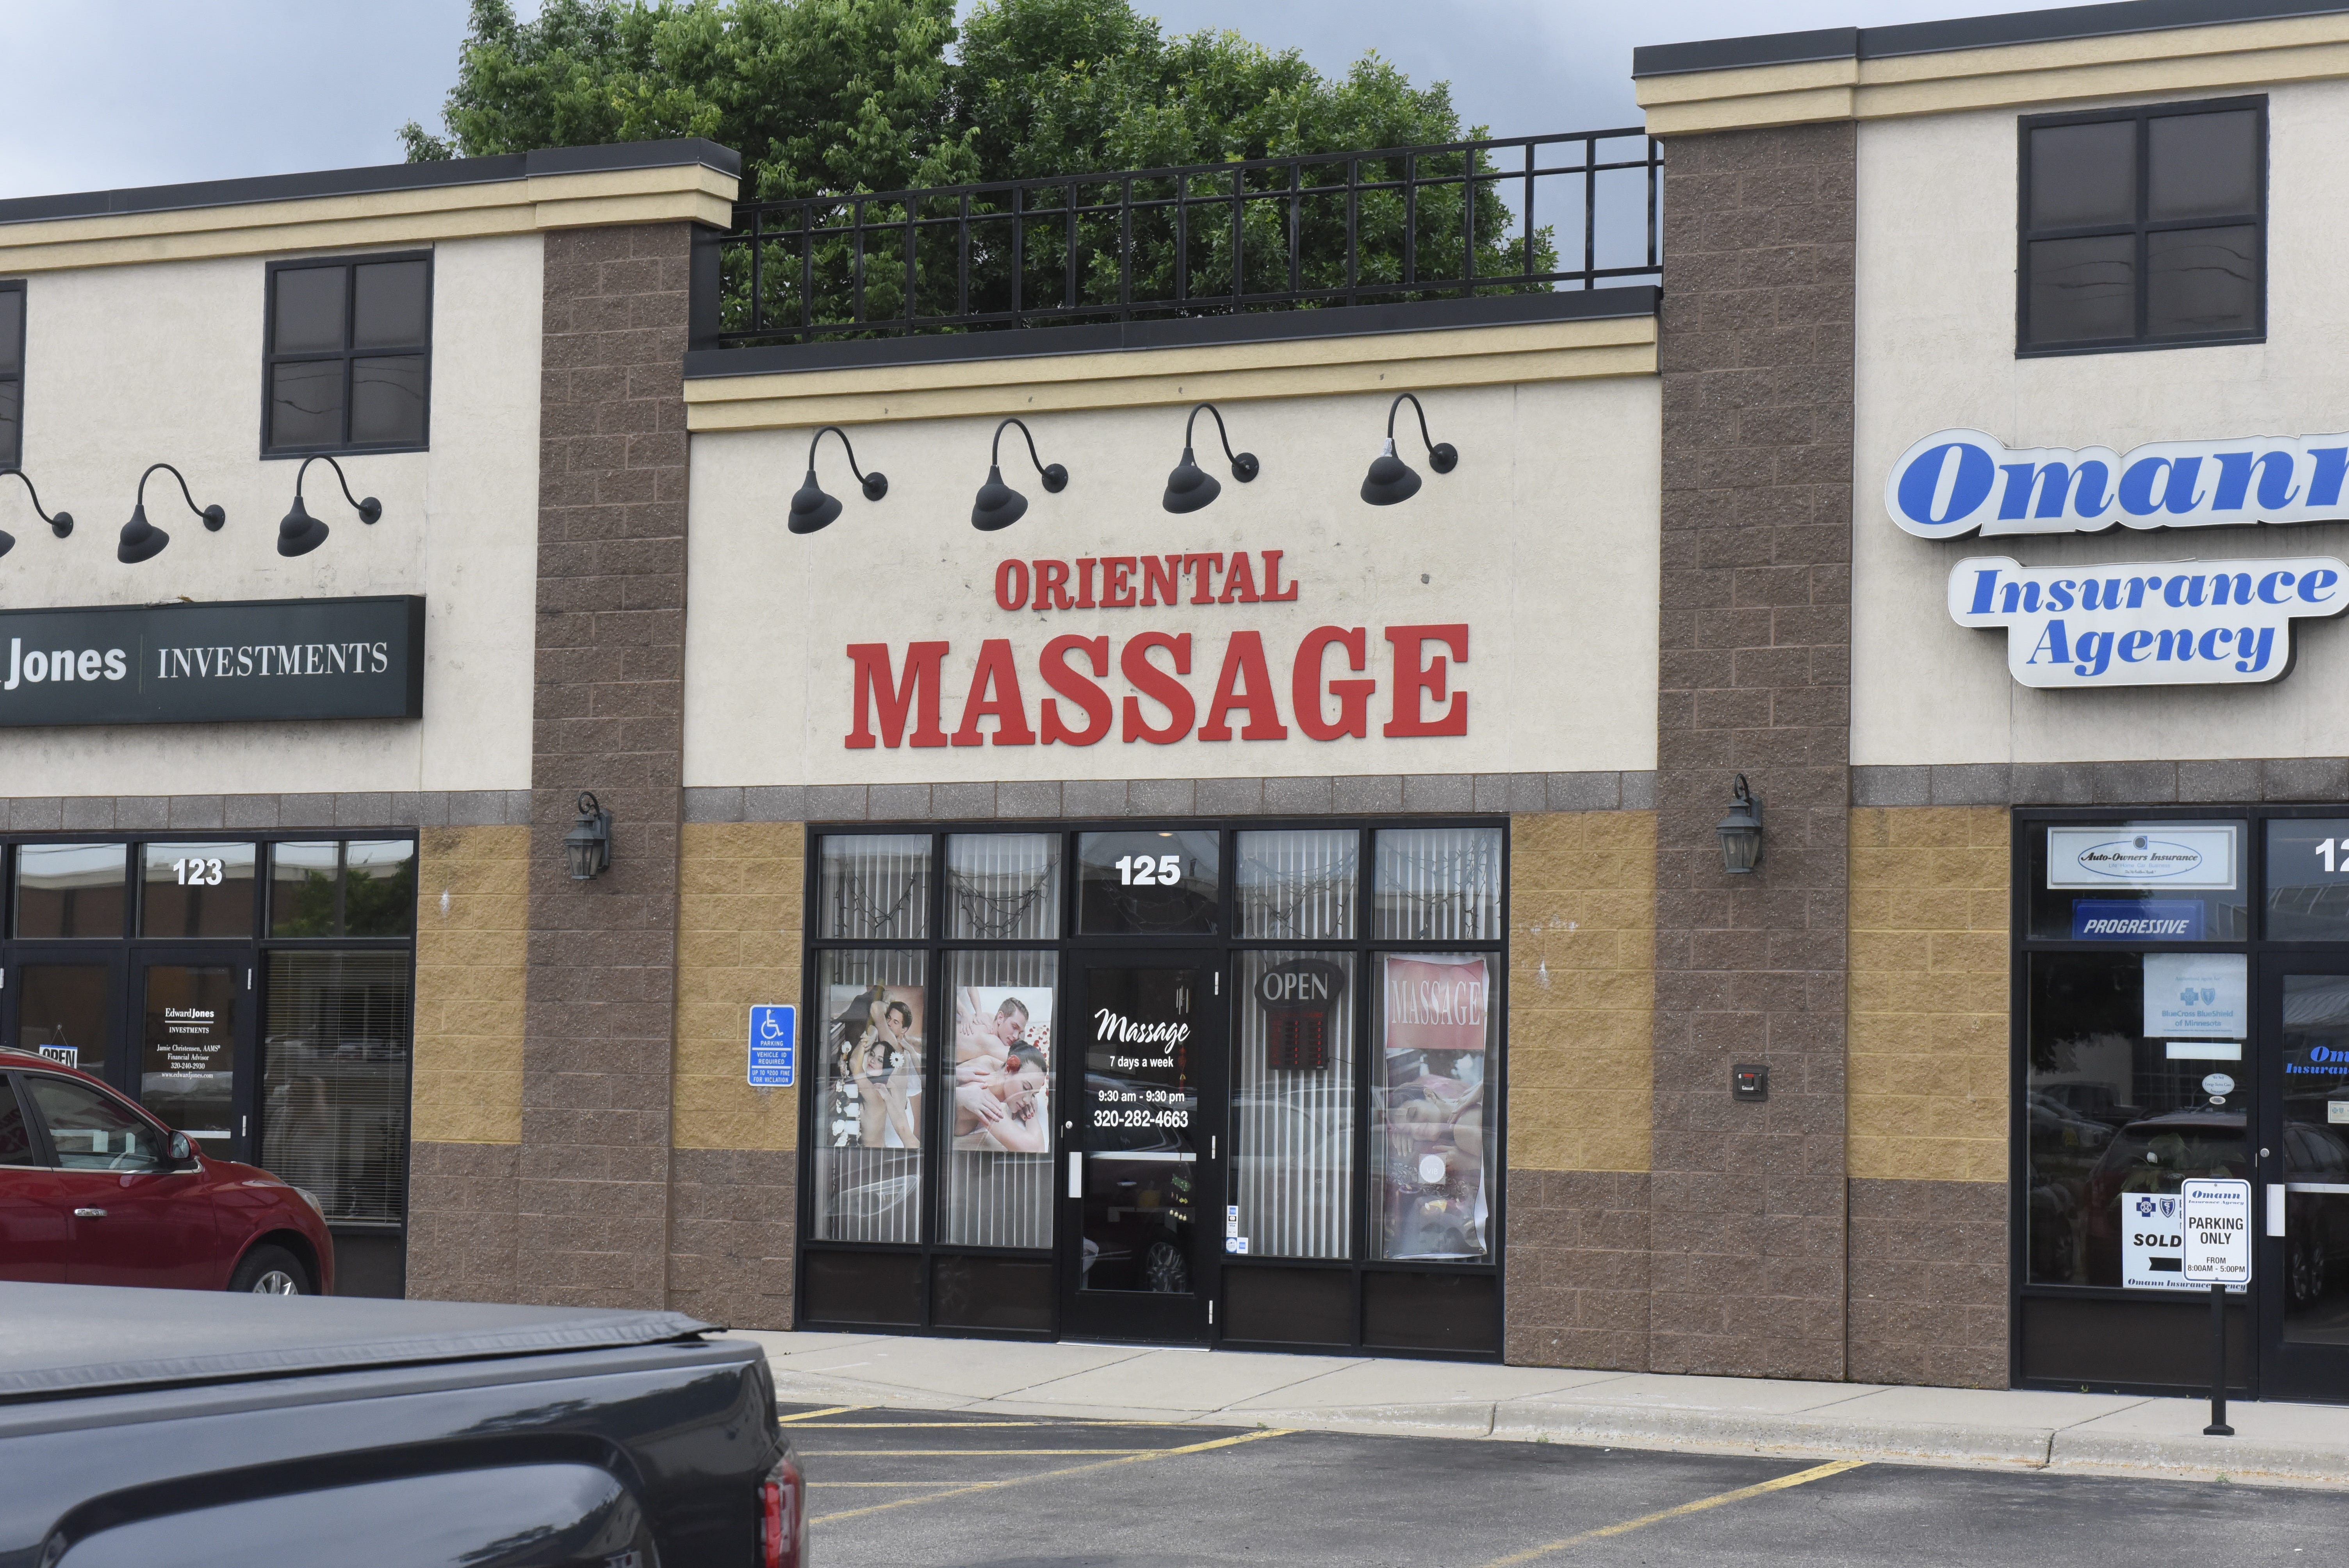 Why a St. Cloud massage business owner can't reapply for a license for 10 years